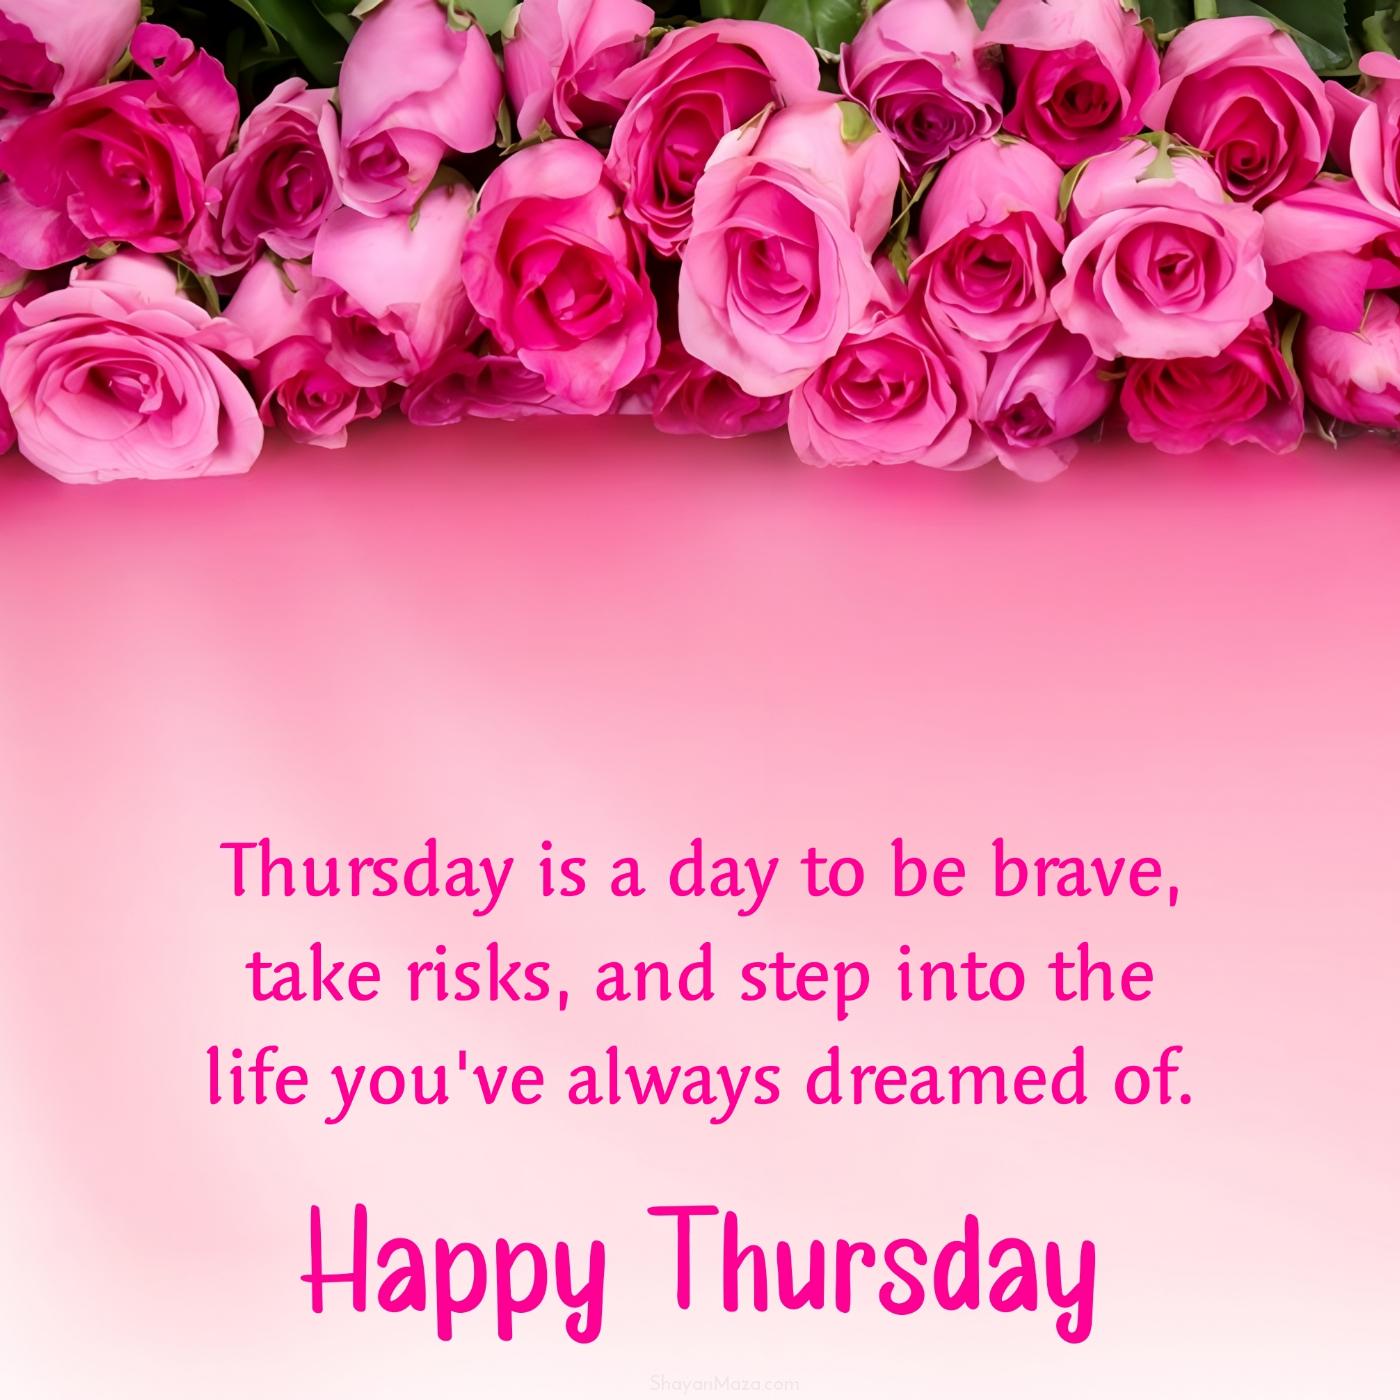 Thursday is a day to be brave take risks and step into